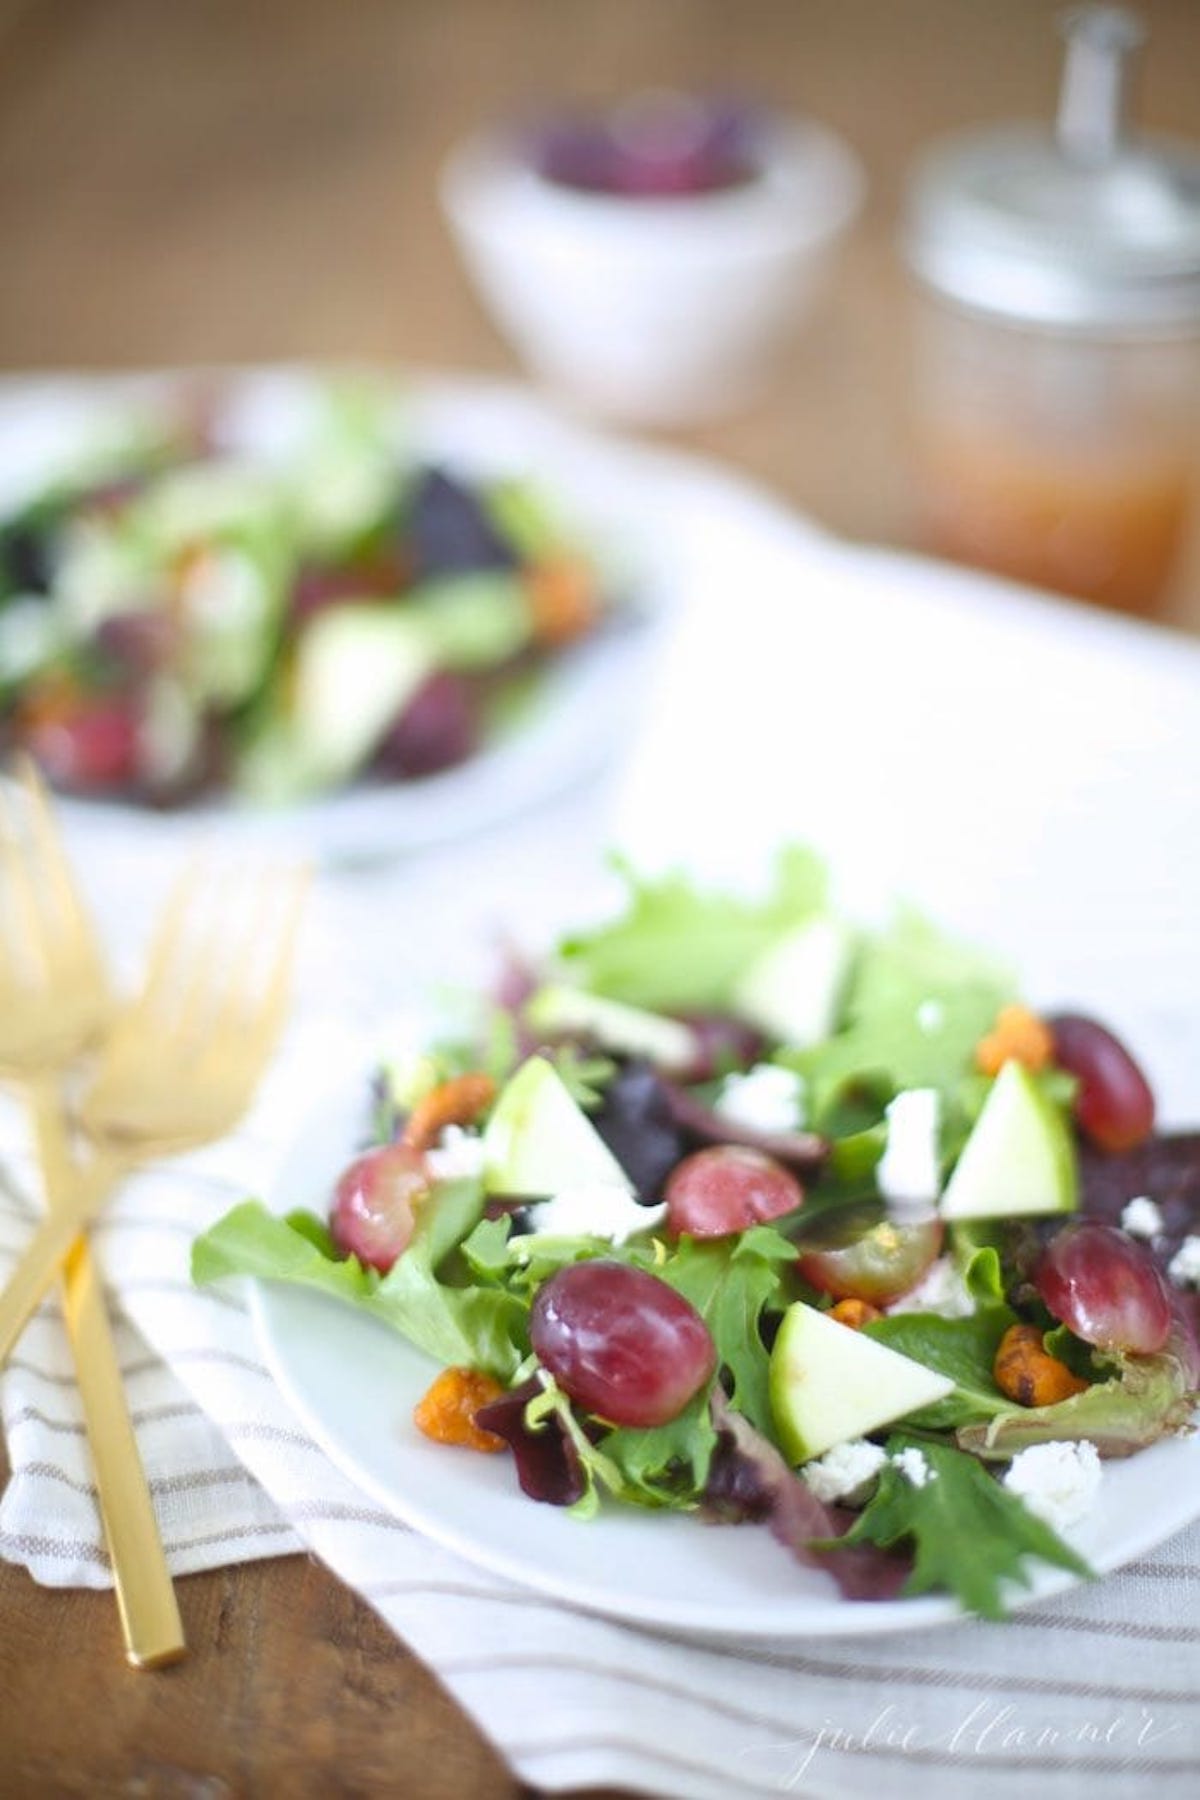 A salad with grapes, walnuts, and raspberry vinaigrette on a plate.